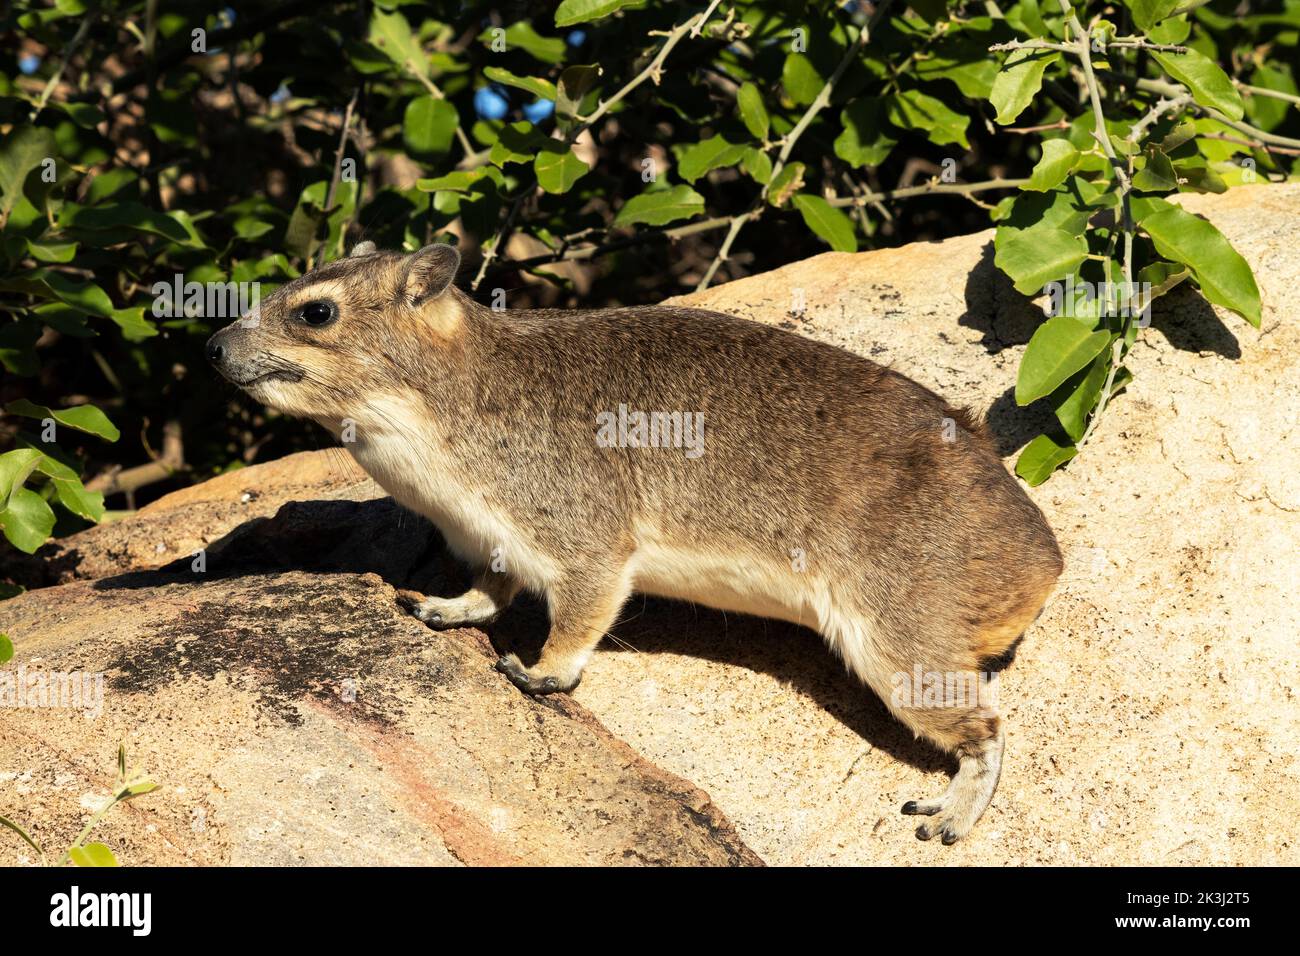 The Bush Hyrax is notorious for its poor heat regulating and will spend a lot of time sunbathing to warm up, especially after cold winter nights. Stock Photo